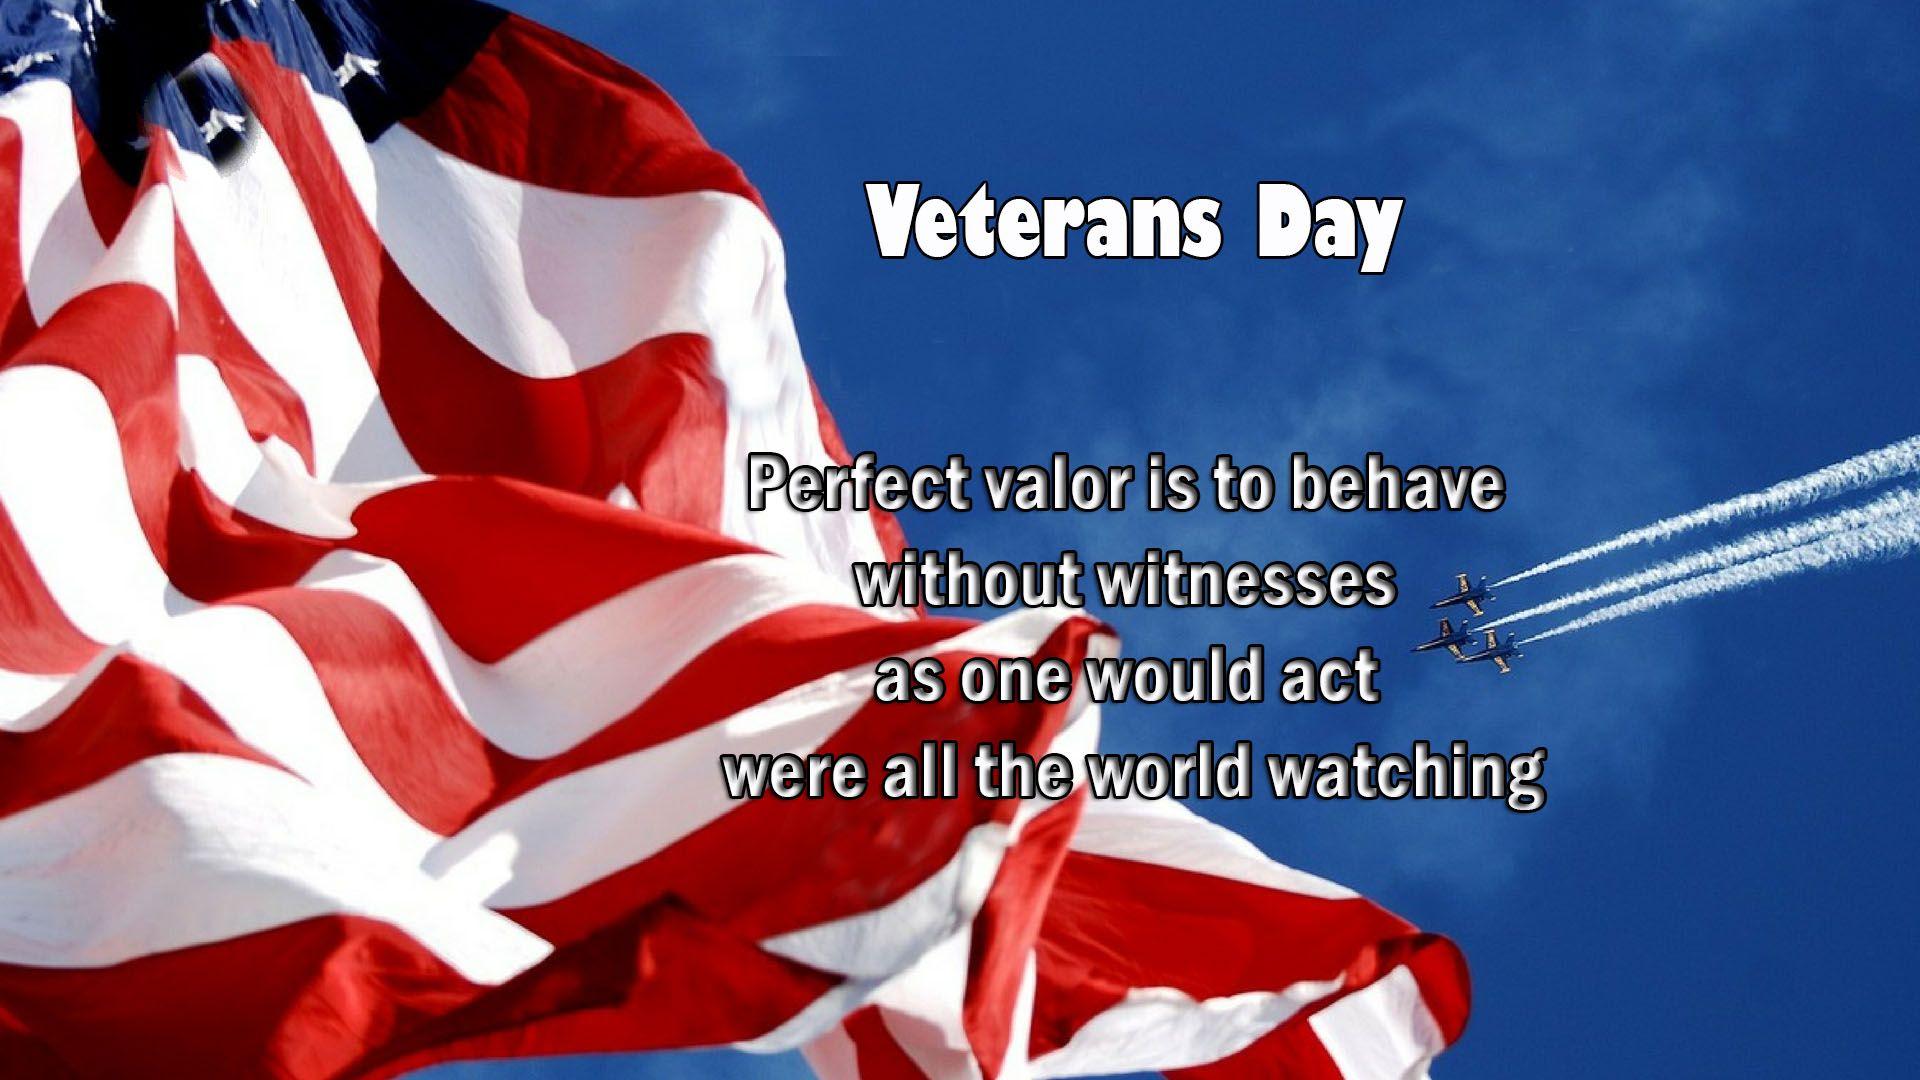 Happy Veterans Day 2017 HD Wallpaper, Cards & Picture. Car